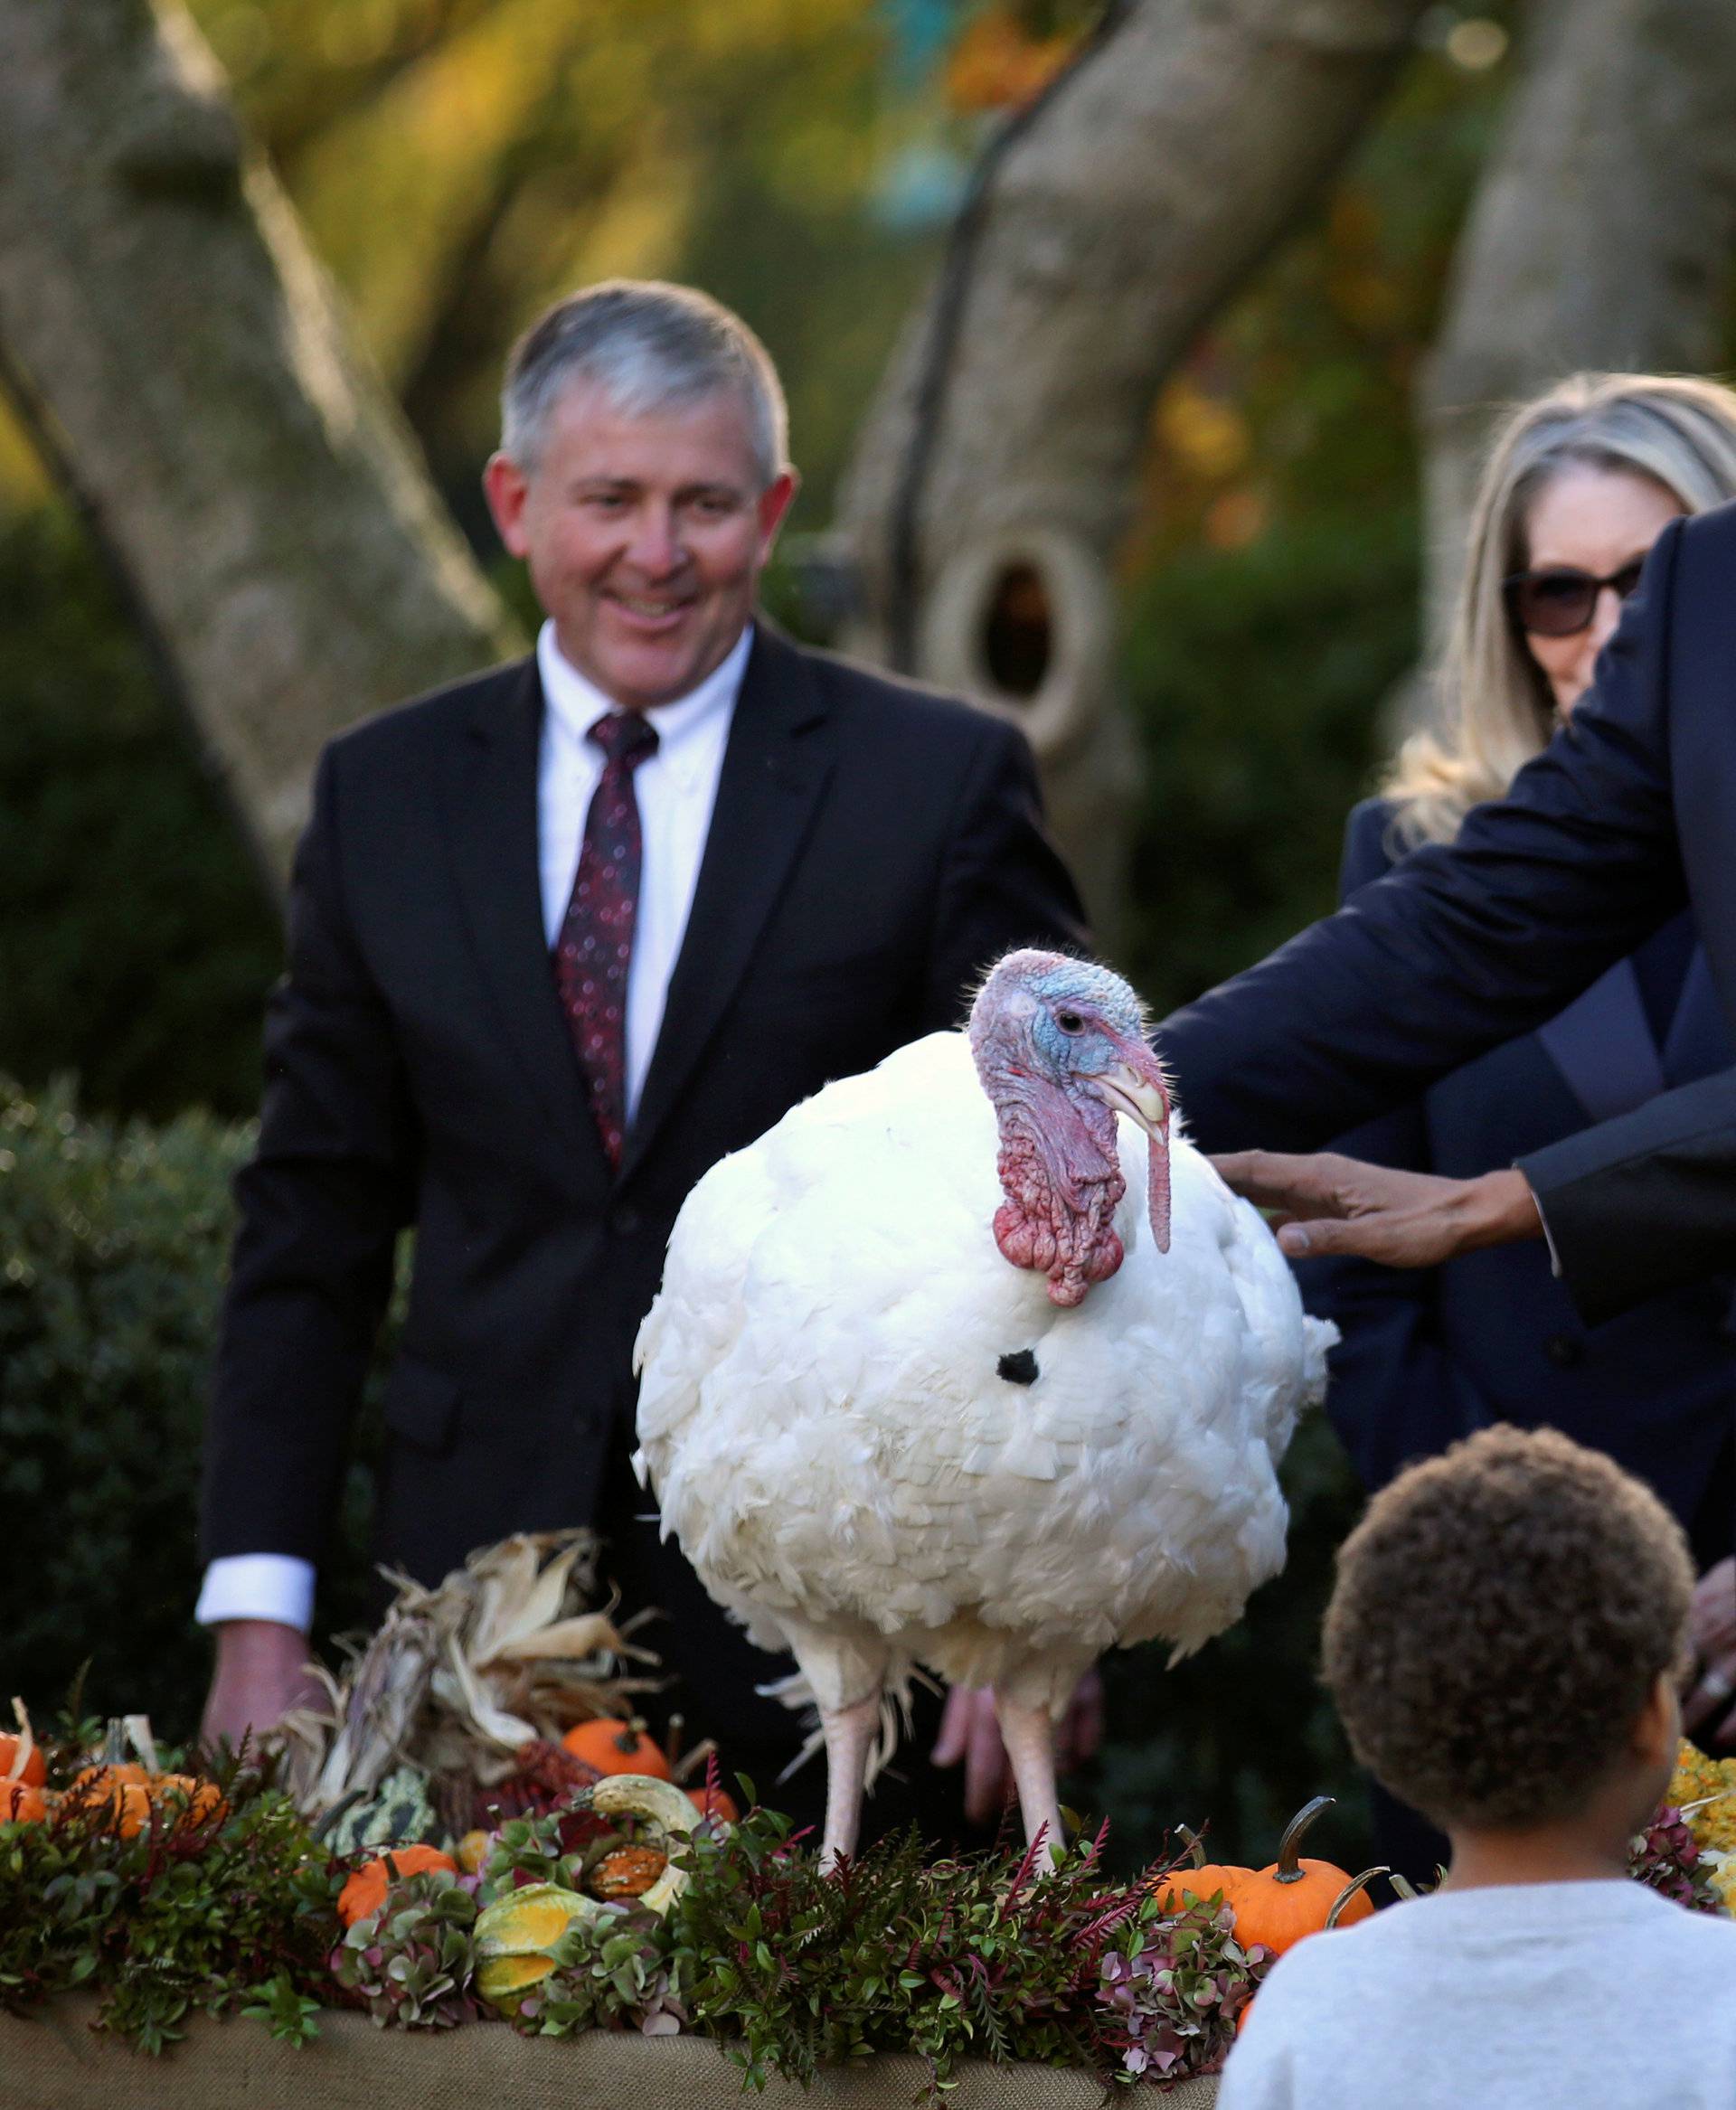 U.S. President Barack Obama attends the pardoning of National Thanksgiving turkey accompanied his nephews Aaron Robinson and Austin Robinson at the Rose Garden of the White House in Washington